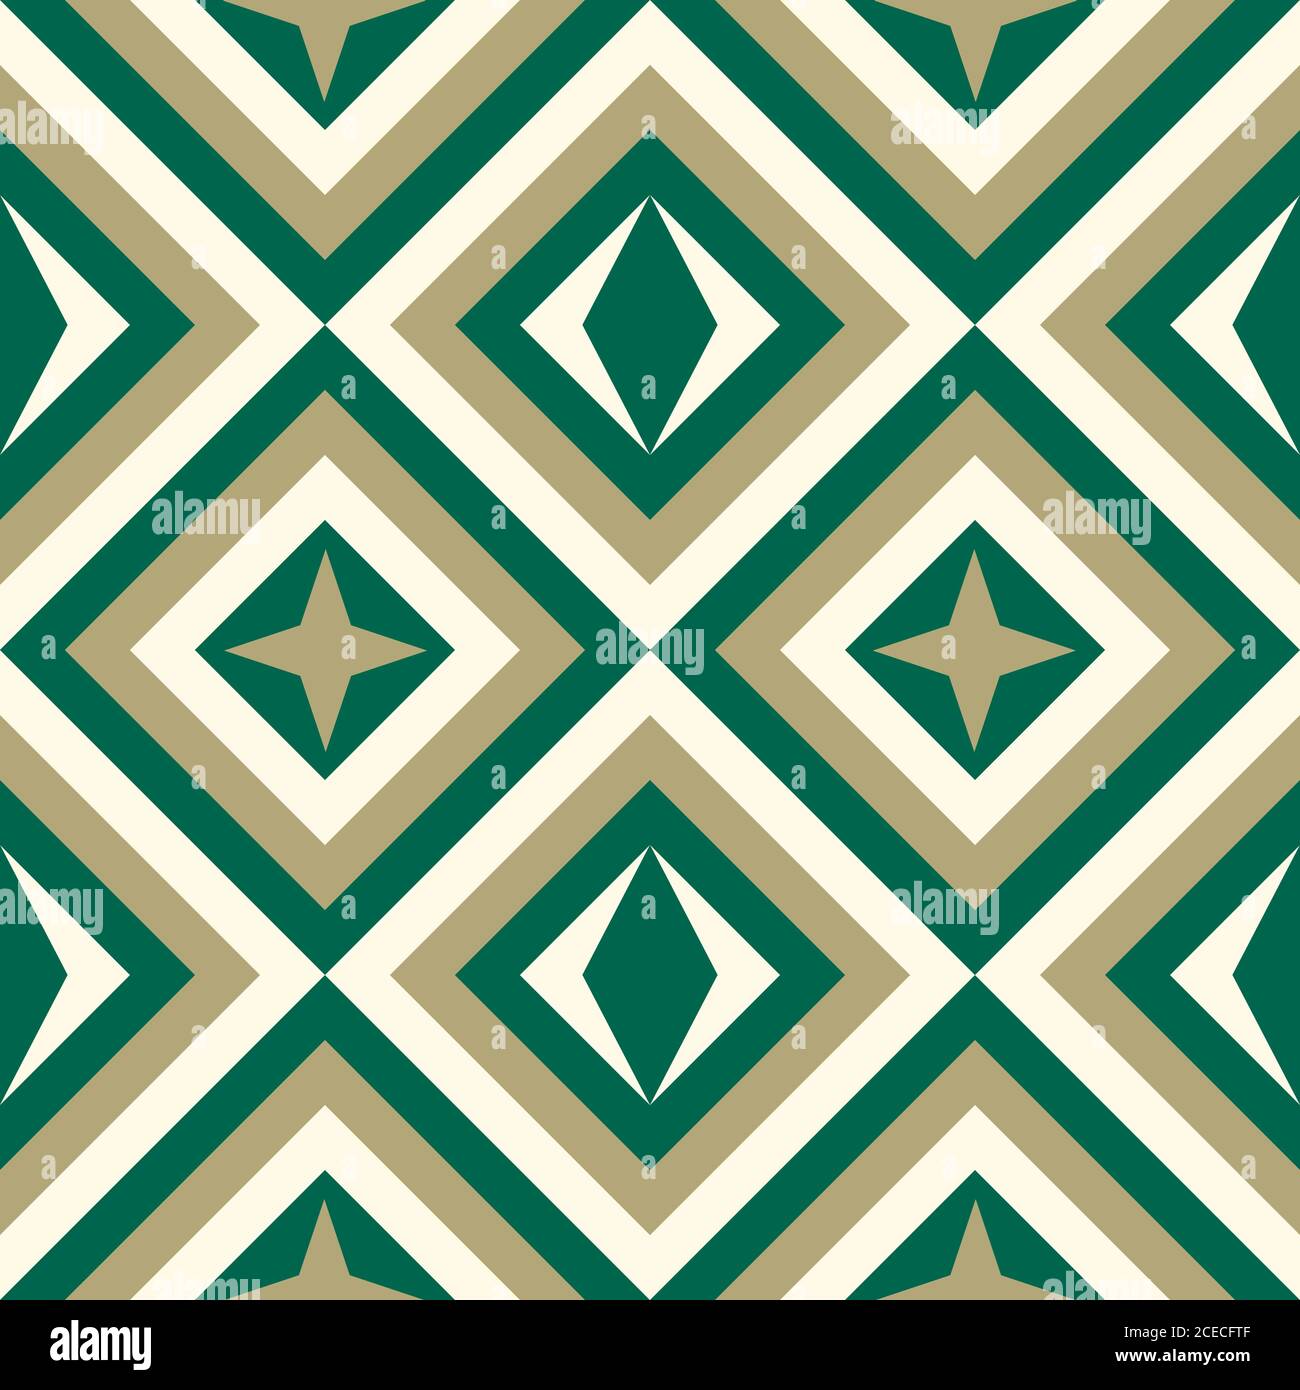 Geometrical pattern in viridian&golden colors, seamless vector background. For fashion textile, cloth, backgrounds. Stock Vector